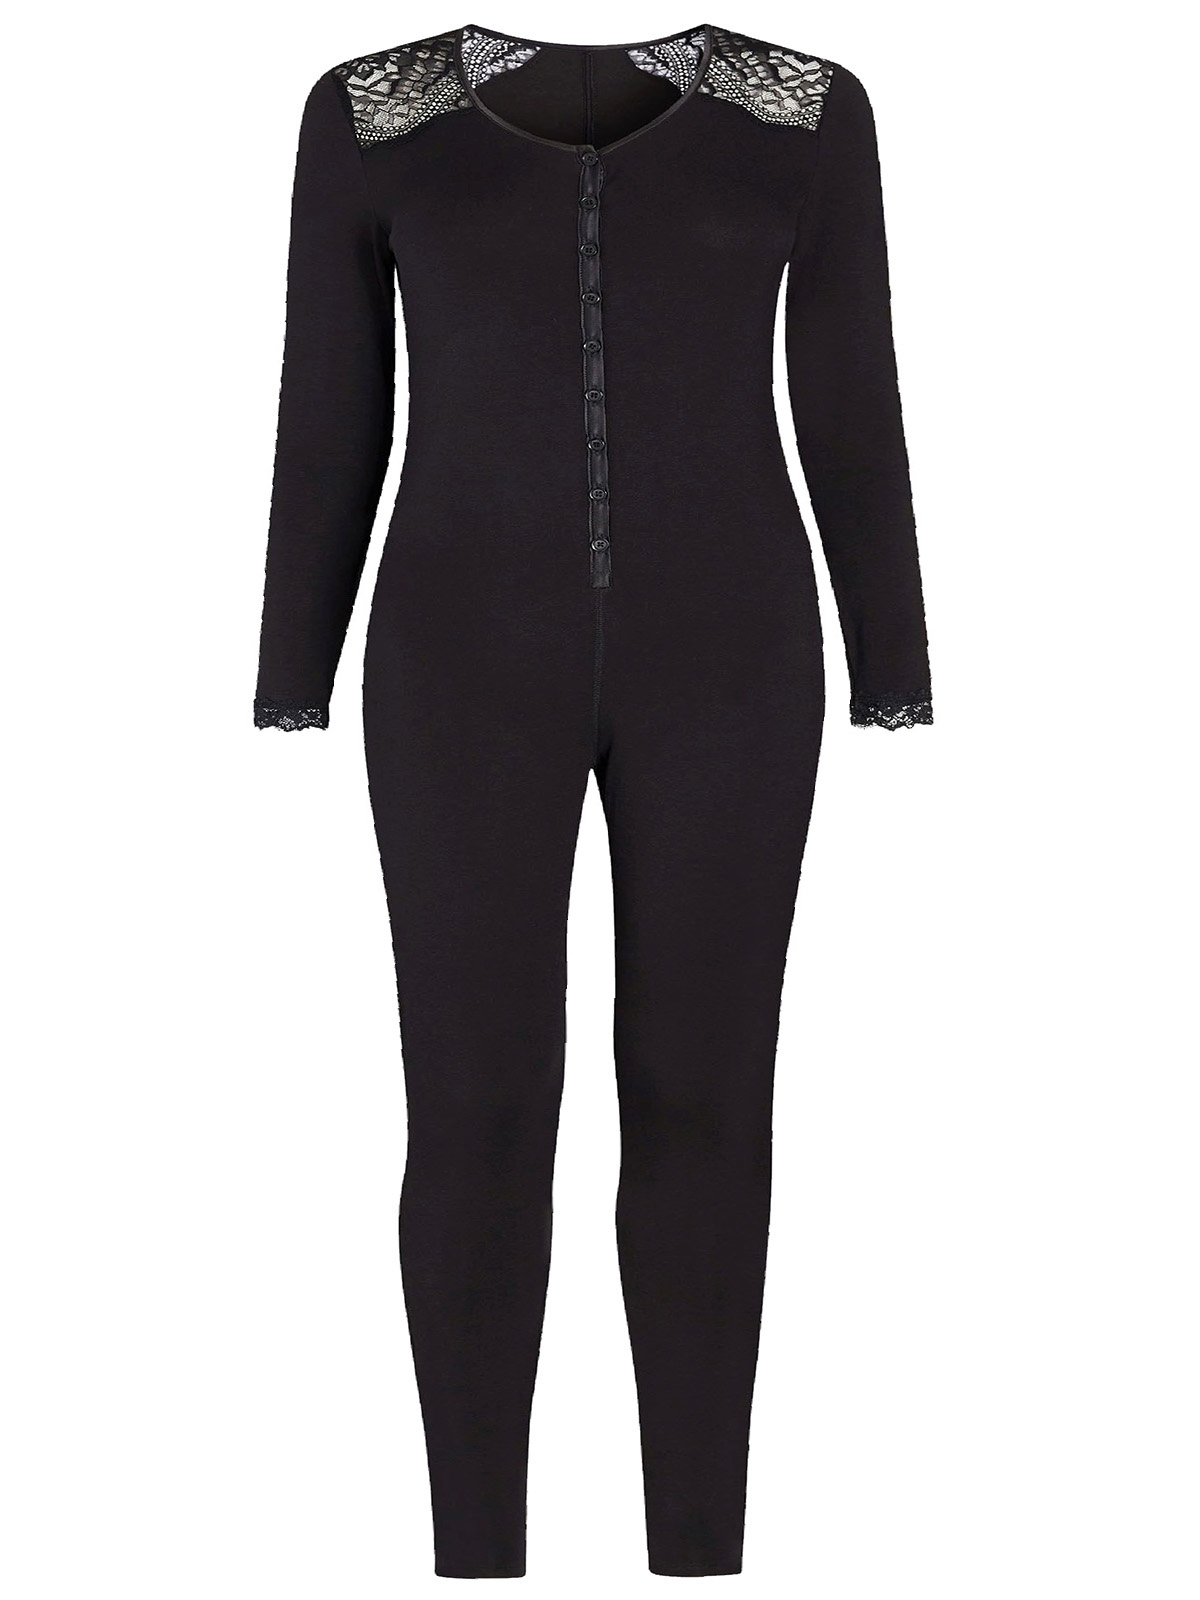 BLACK Lace Thermal Onesie - Size S to XL